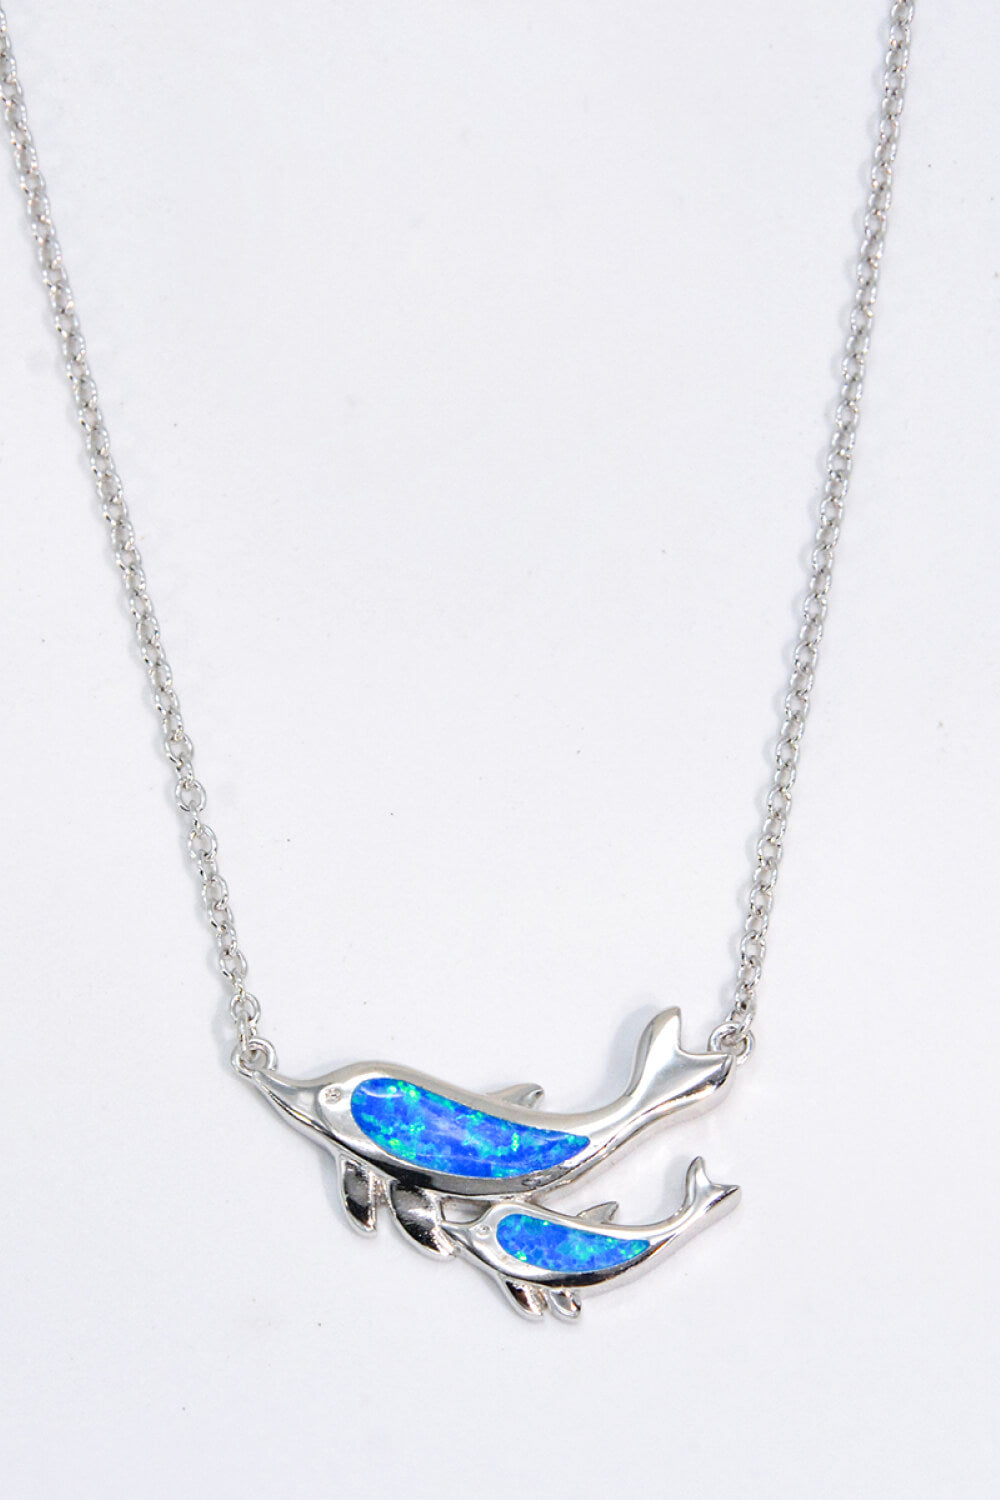 Opal Dolphin Chain-Link Necklace - Necklaces - FITGGINS